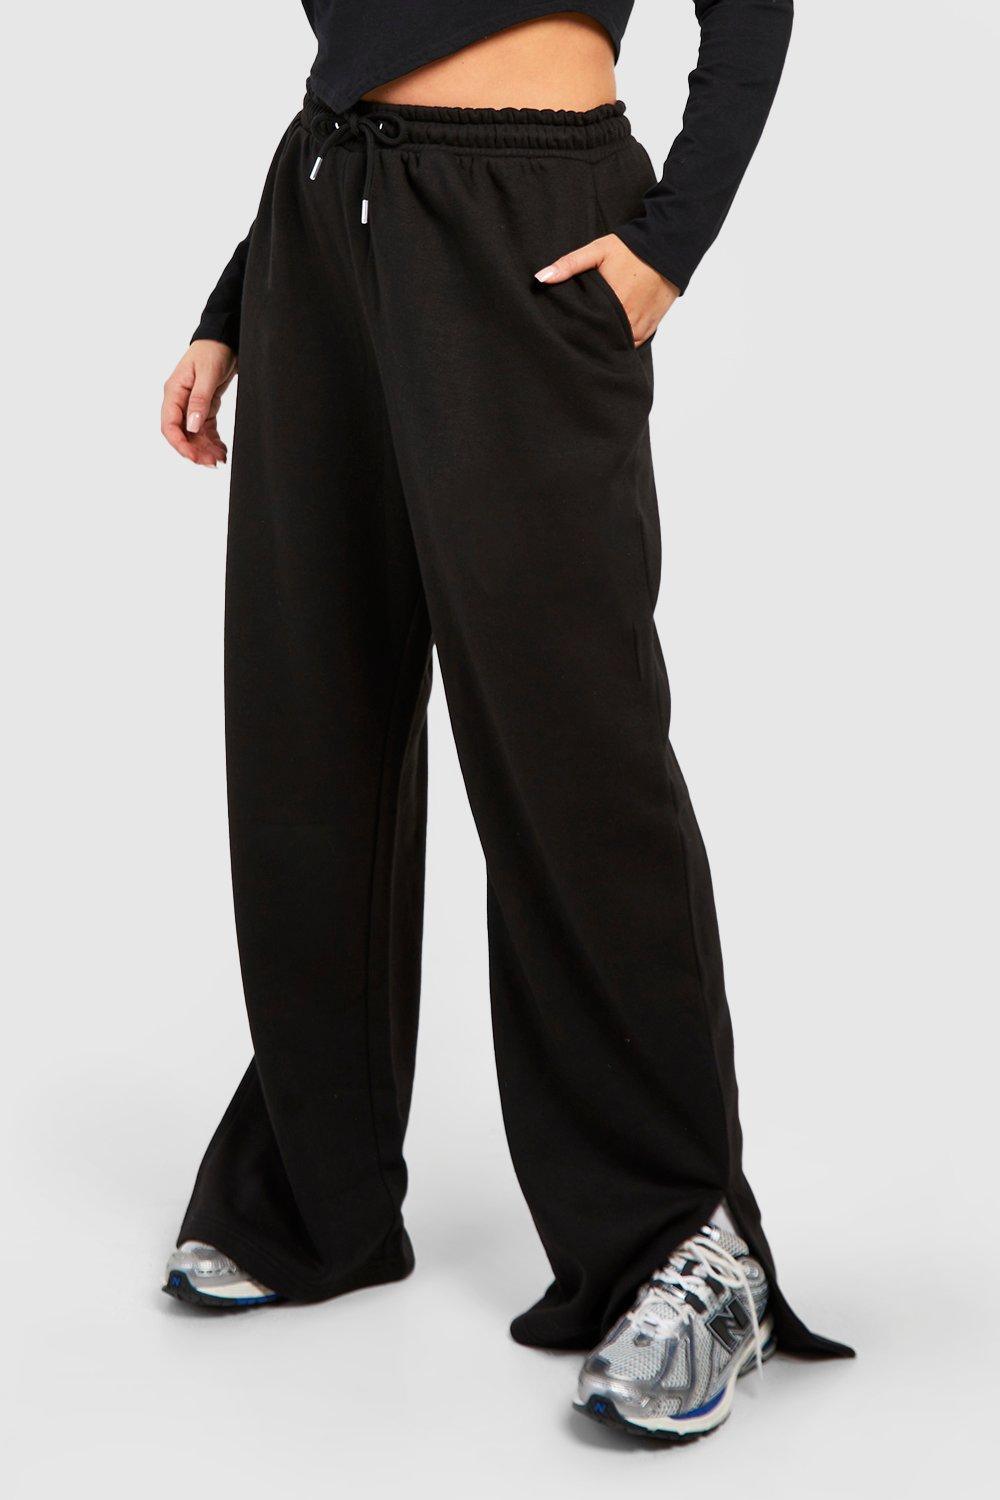 Illusion Lee Retired womens flare sweatpants Inclined Must Tackle